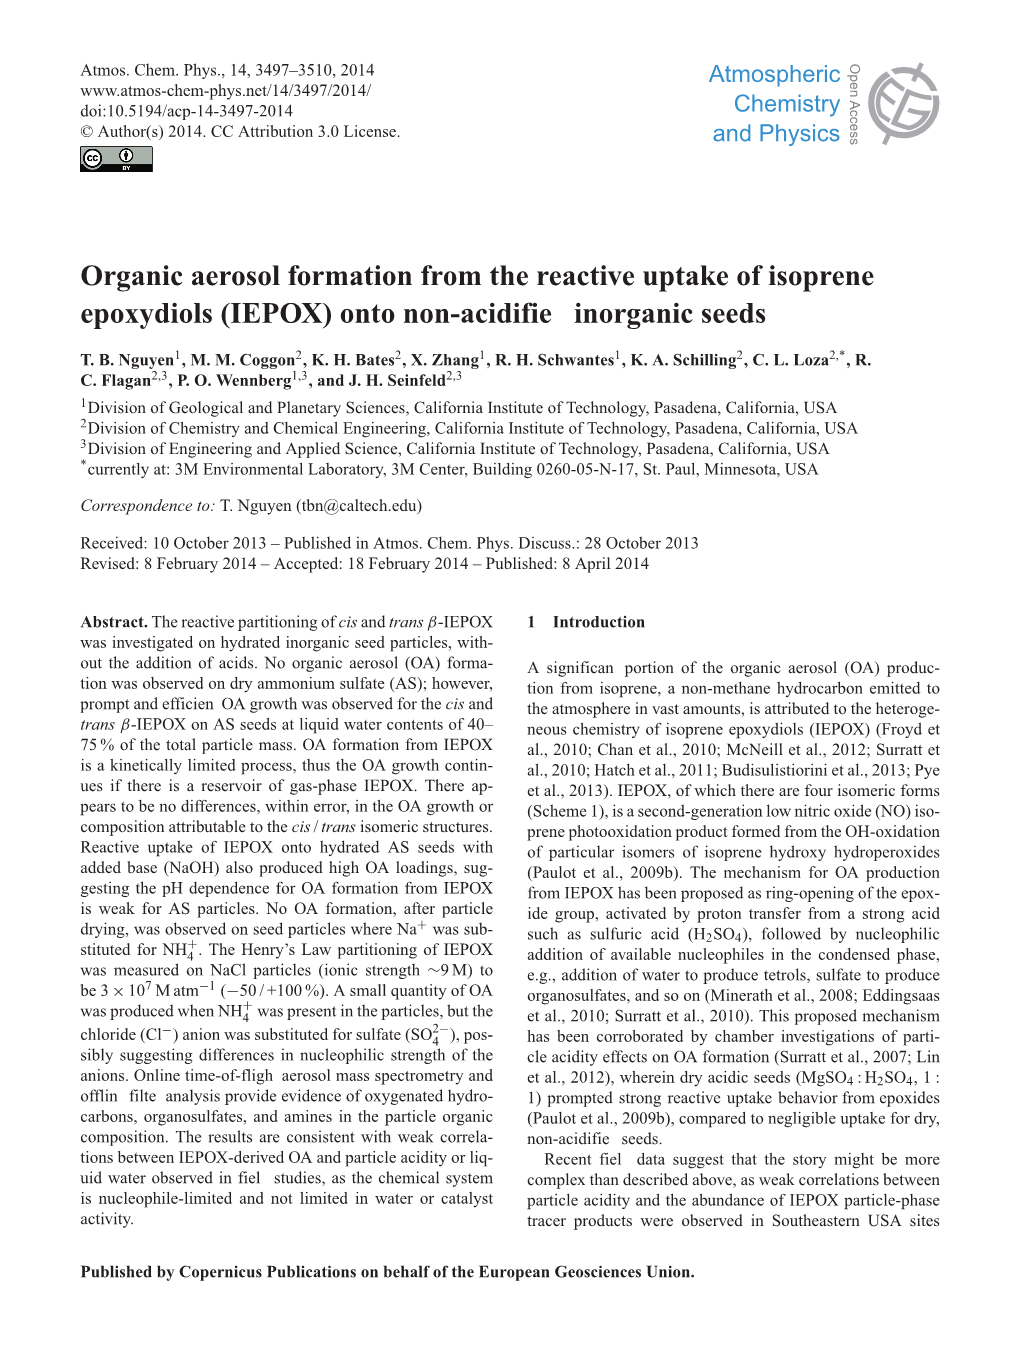 Organic Aerosol Formation from the Reactive Uptake of IEPOX 3499